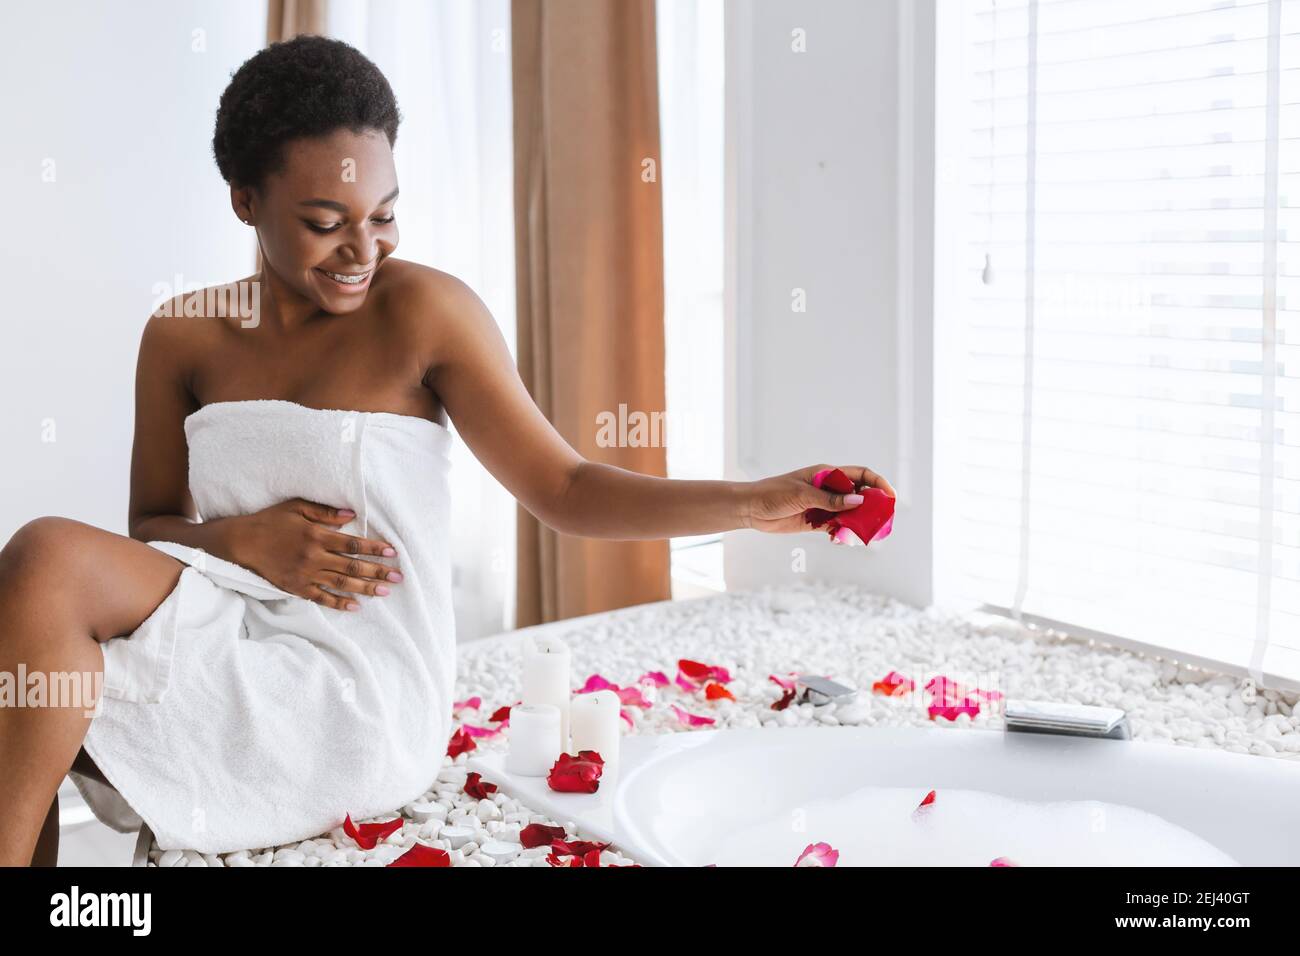 Self care treatment, time for herself, enjoying peace and calm Stock Photo